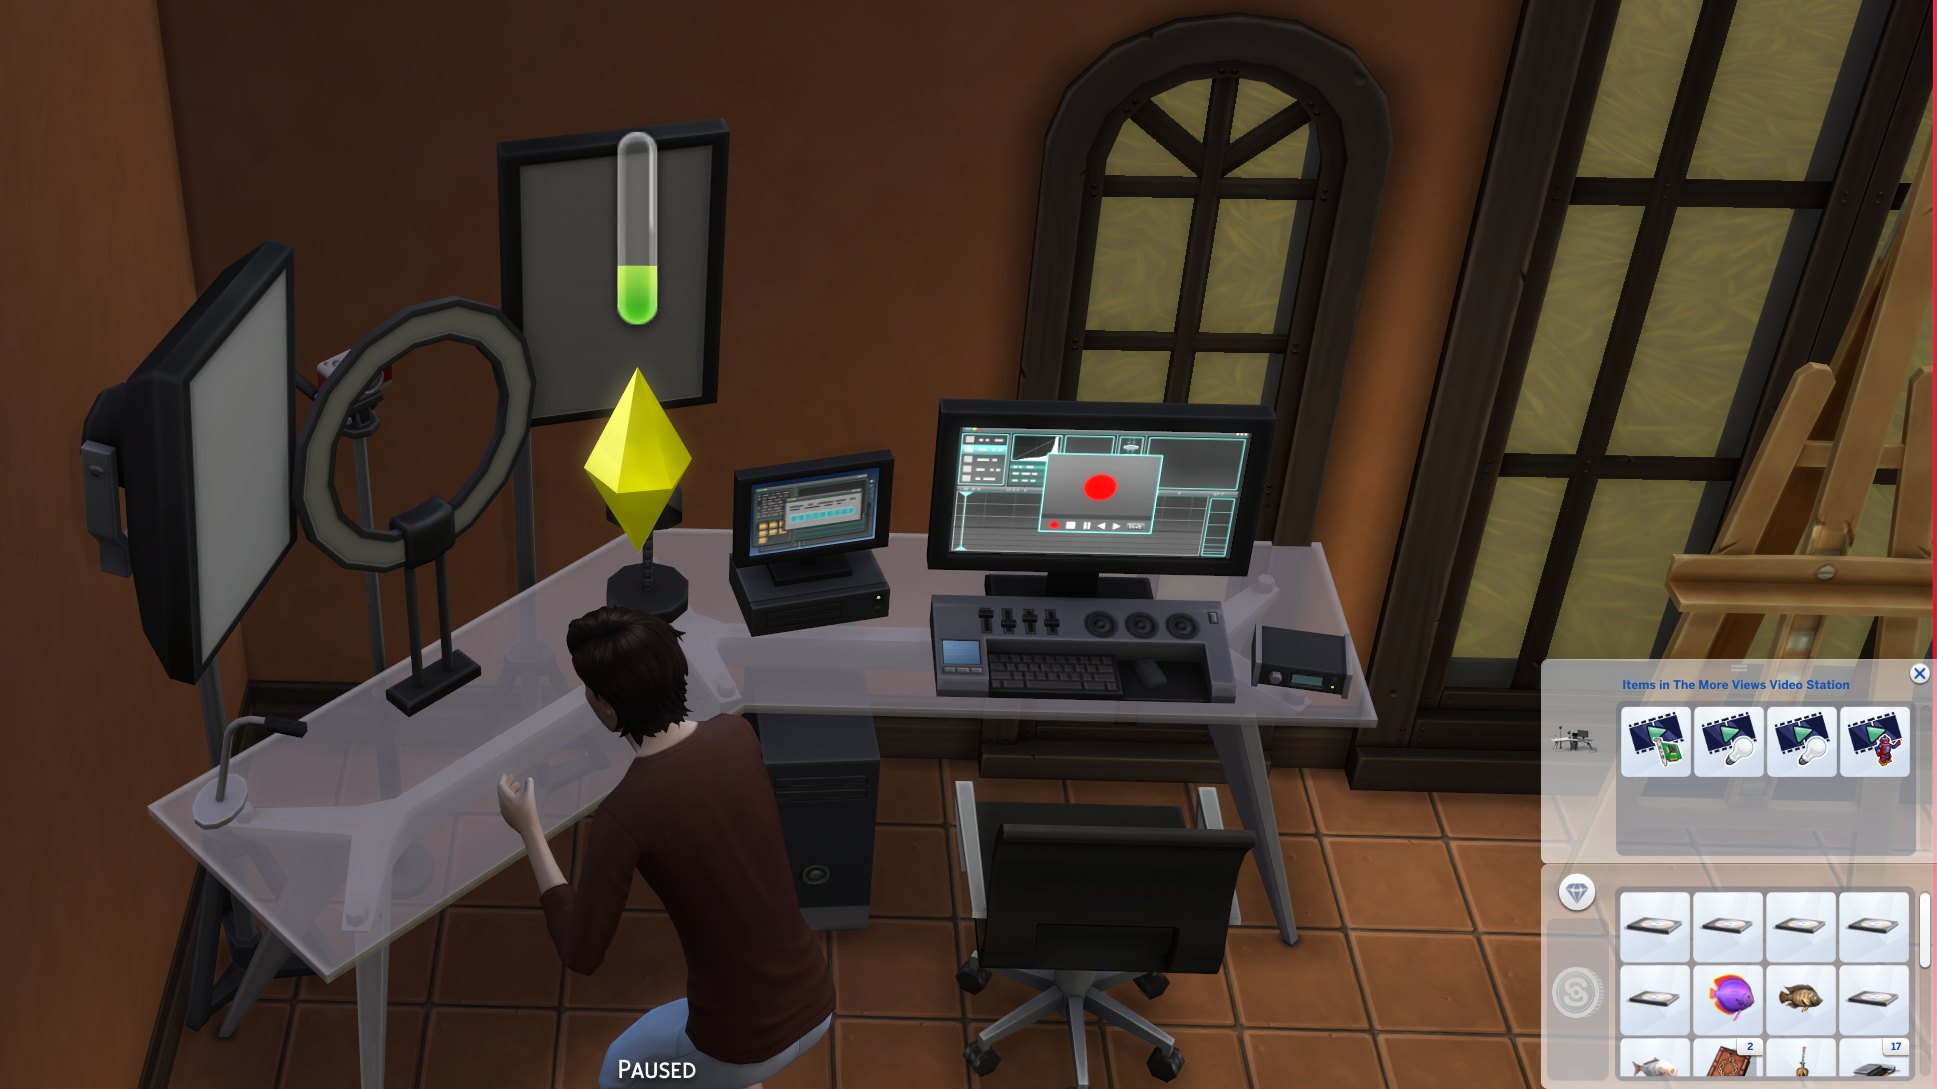 cannot afford new computer to play sims 4